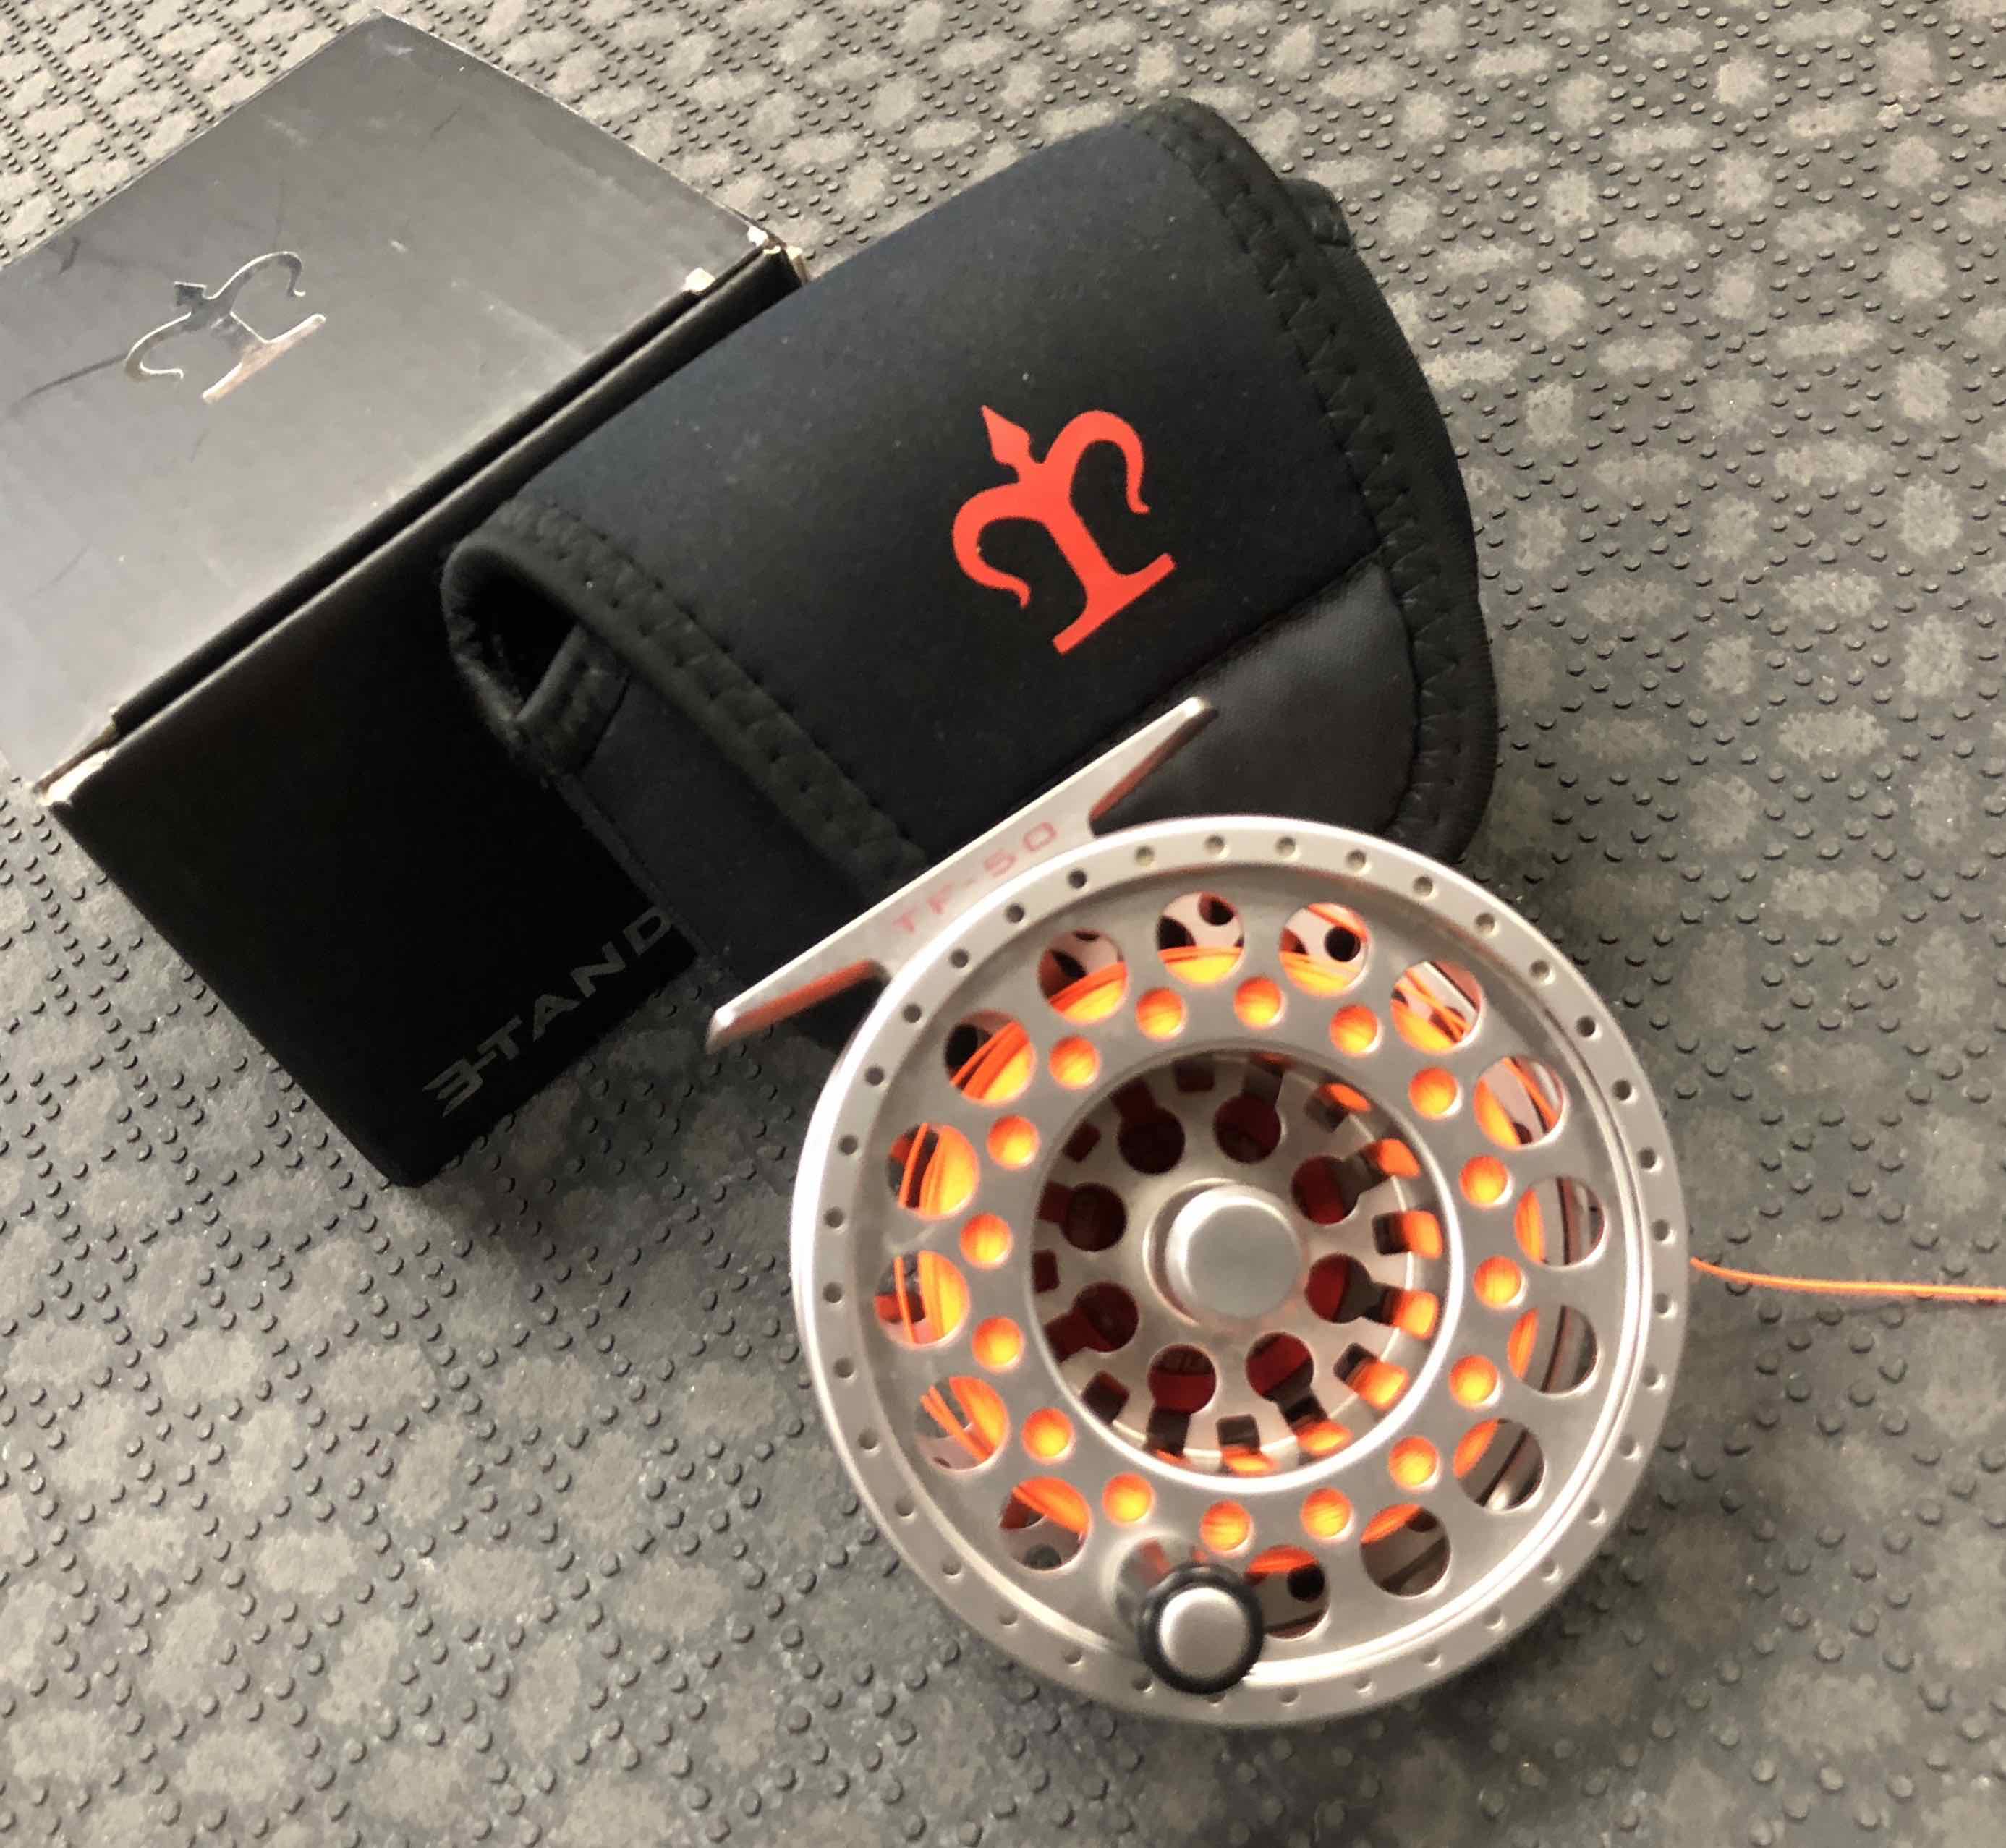 3-Tand - TF50 Fly Reel c/w Backing - LIKE NEW! - $150